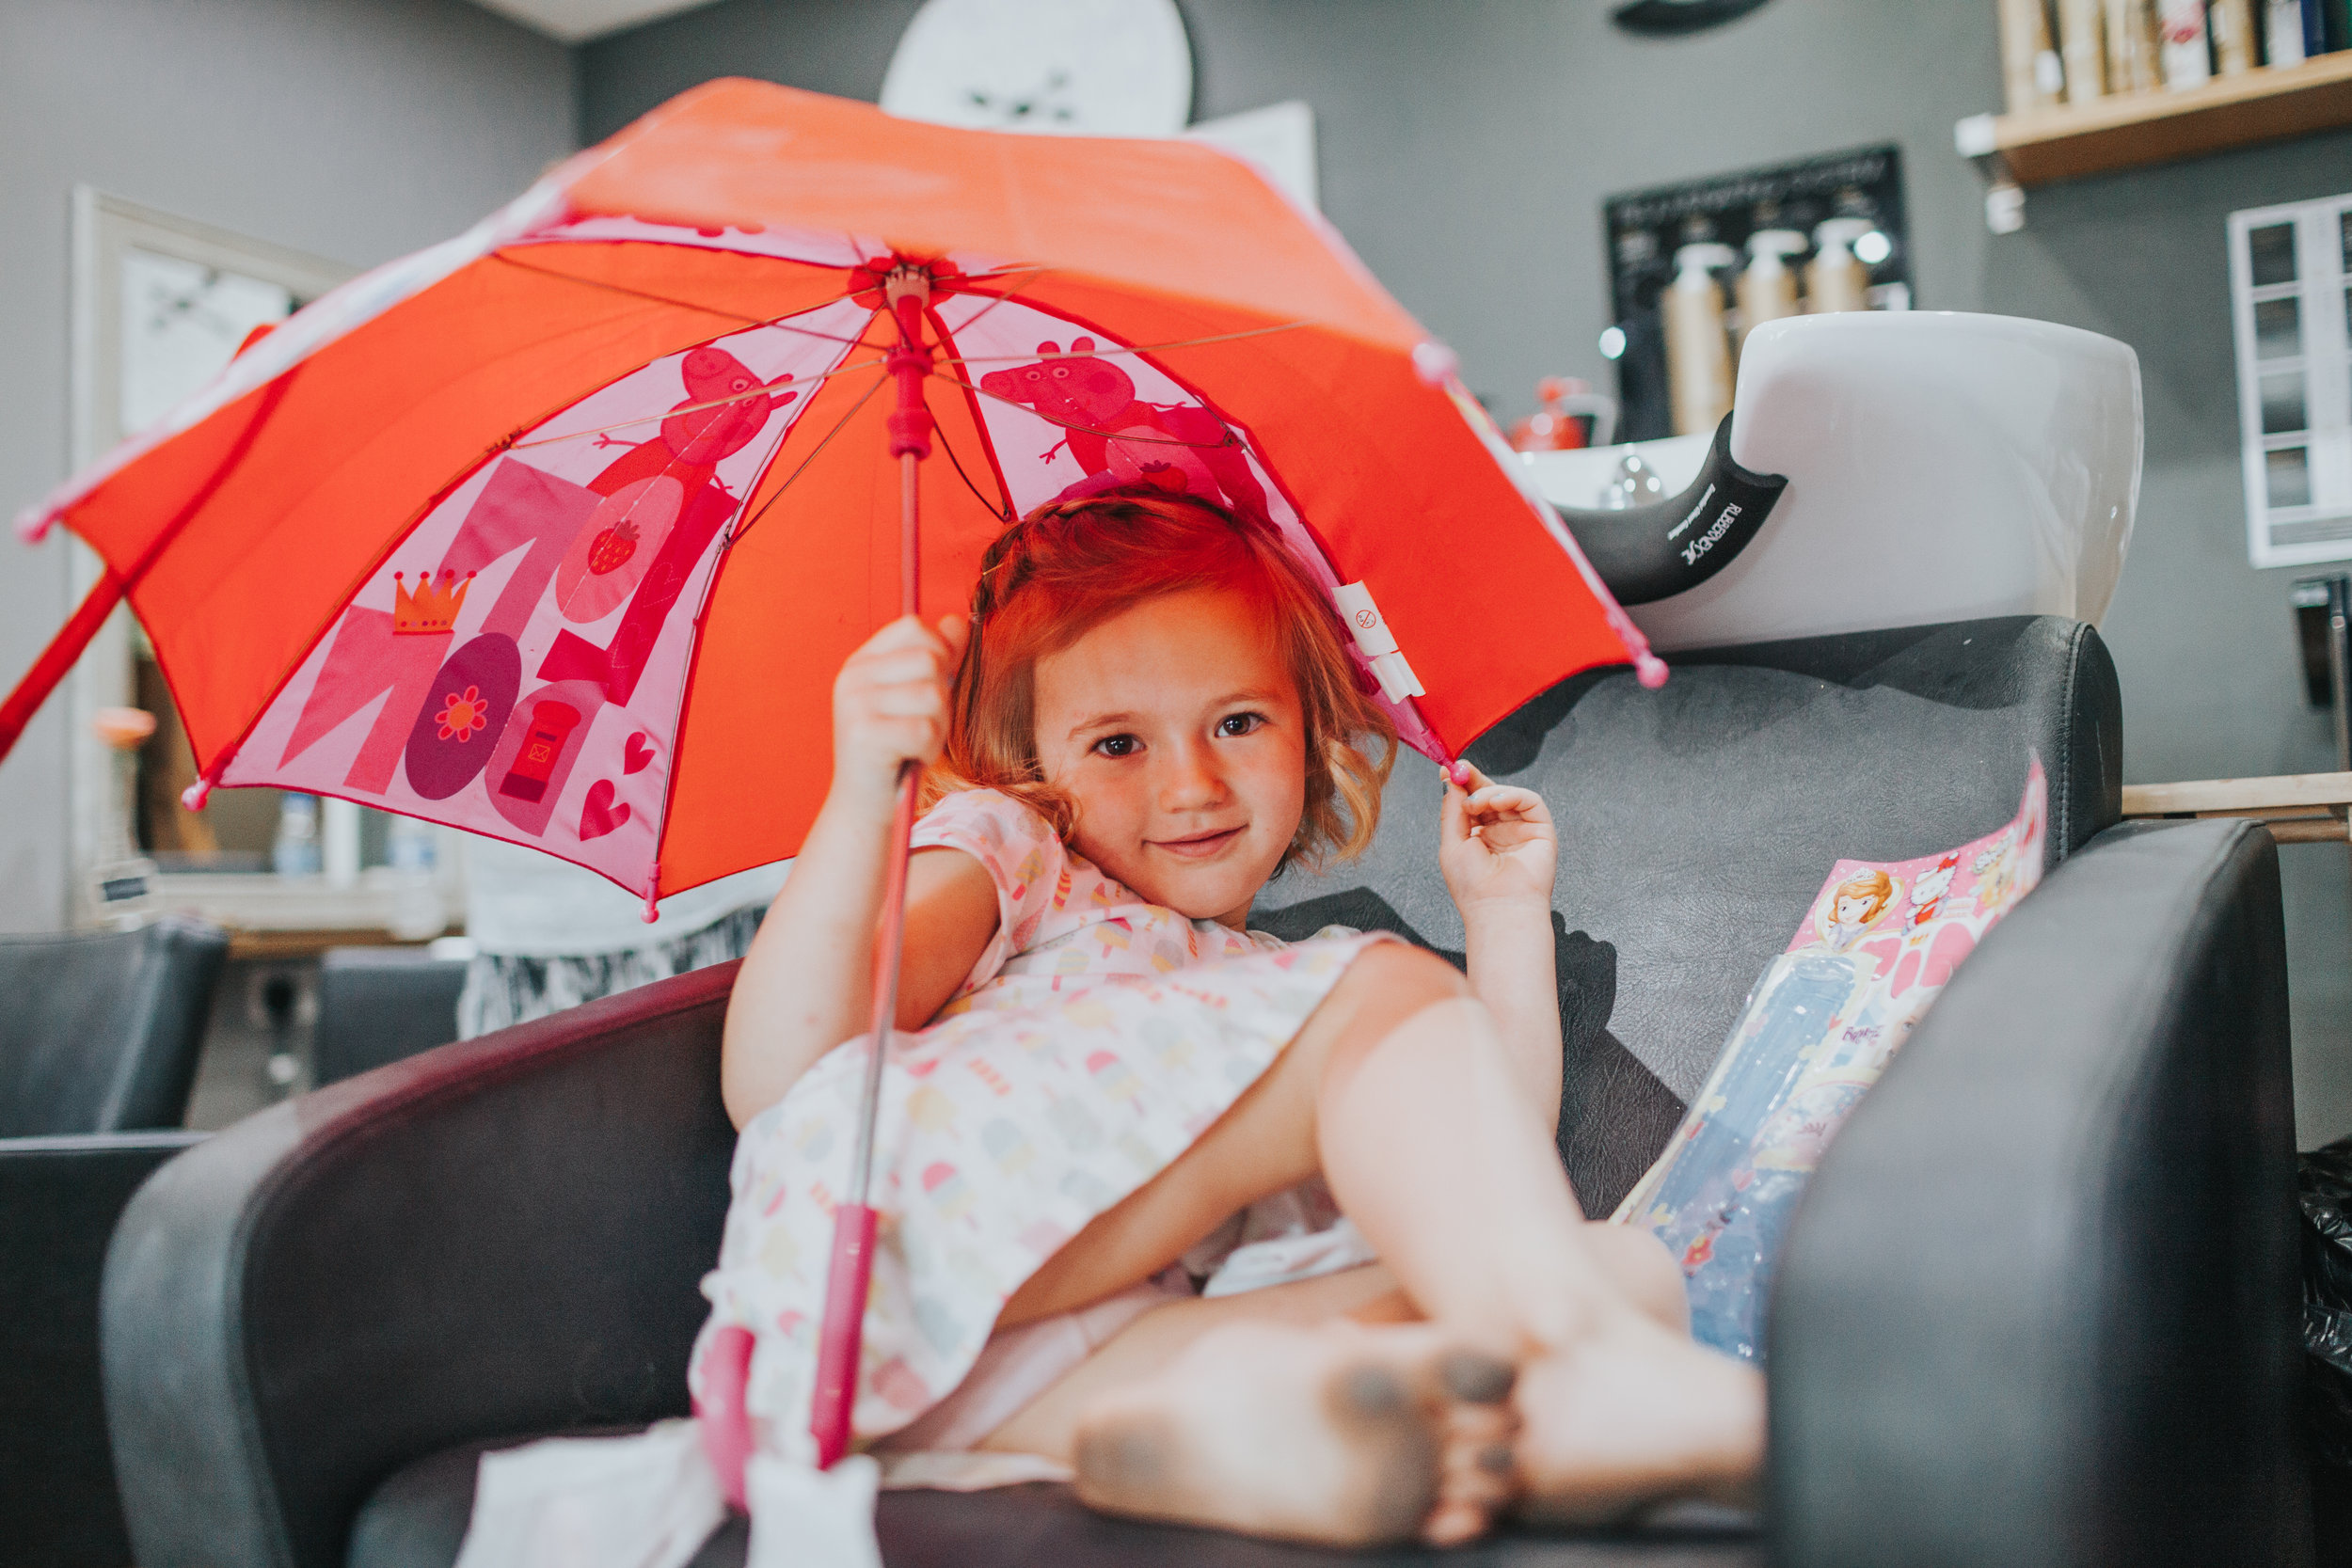  Previously grumpy child, smiles and plays with hair looking into the camera and showing her blackened feet from running around barefoot. She sits under a red umbrella with total rebellious disregard for "It's bad luck to open umbrella's indoors rule